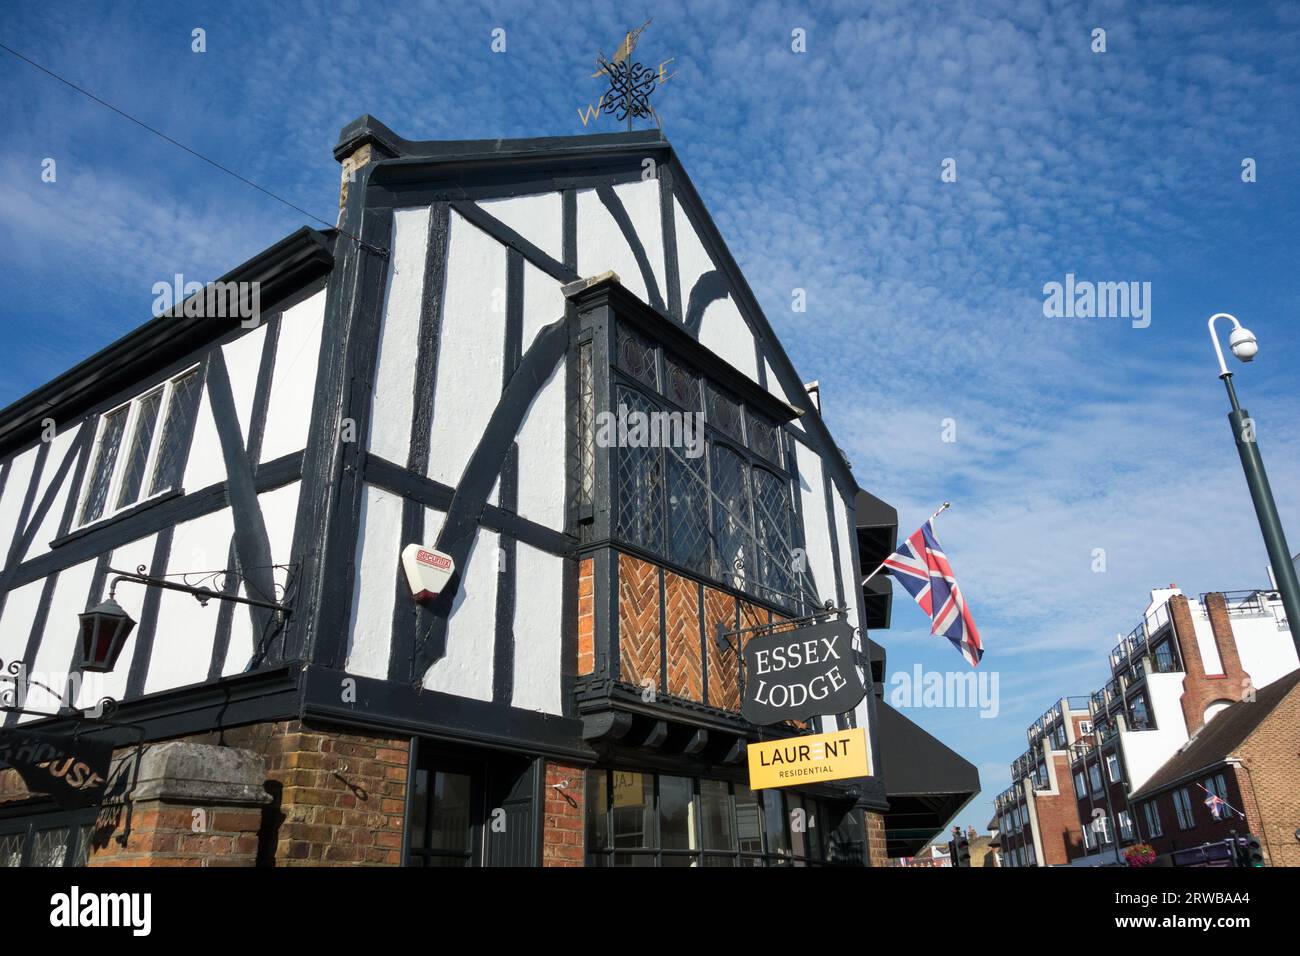 The exterior of the timber-framed Essex Lodge, Station Road, Barnes, London, SW13, England, U.K. Stock Photo